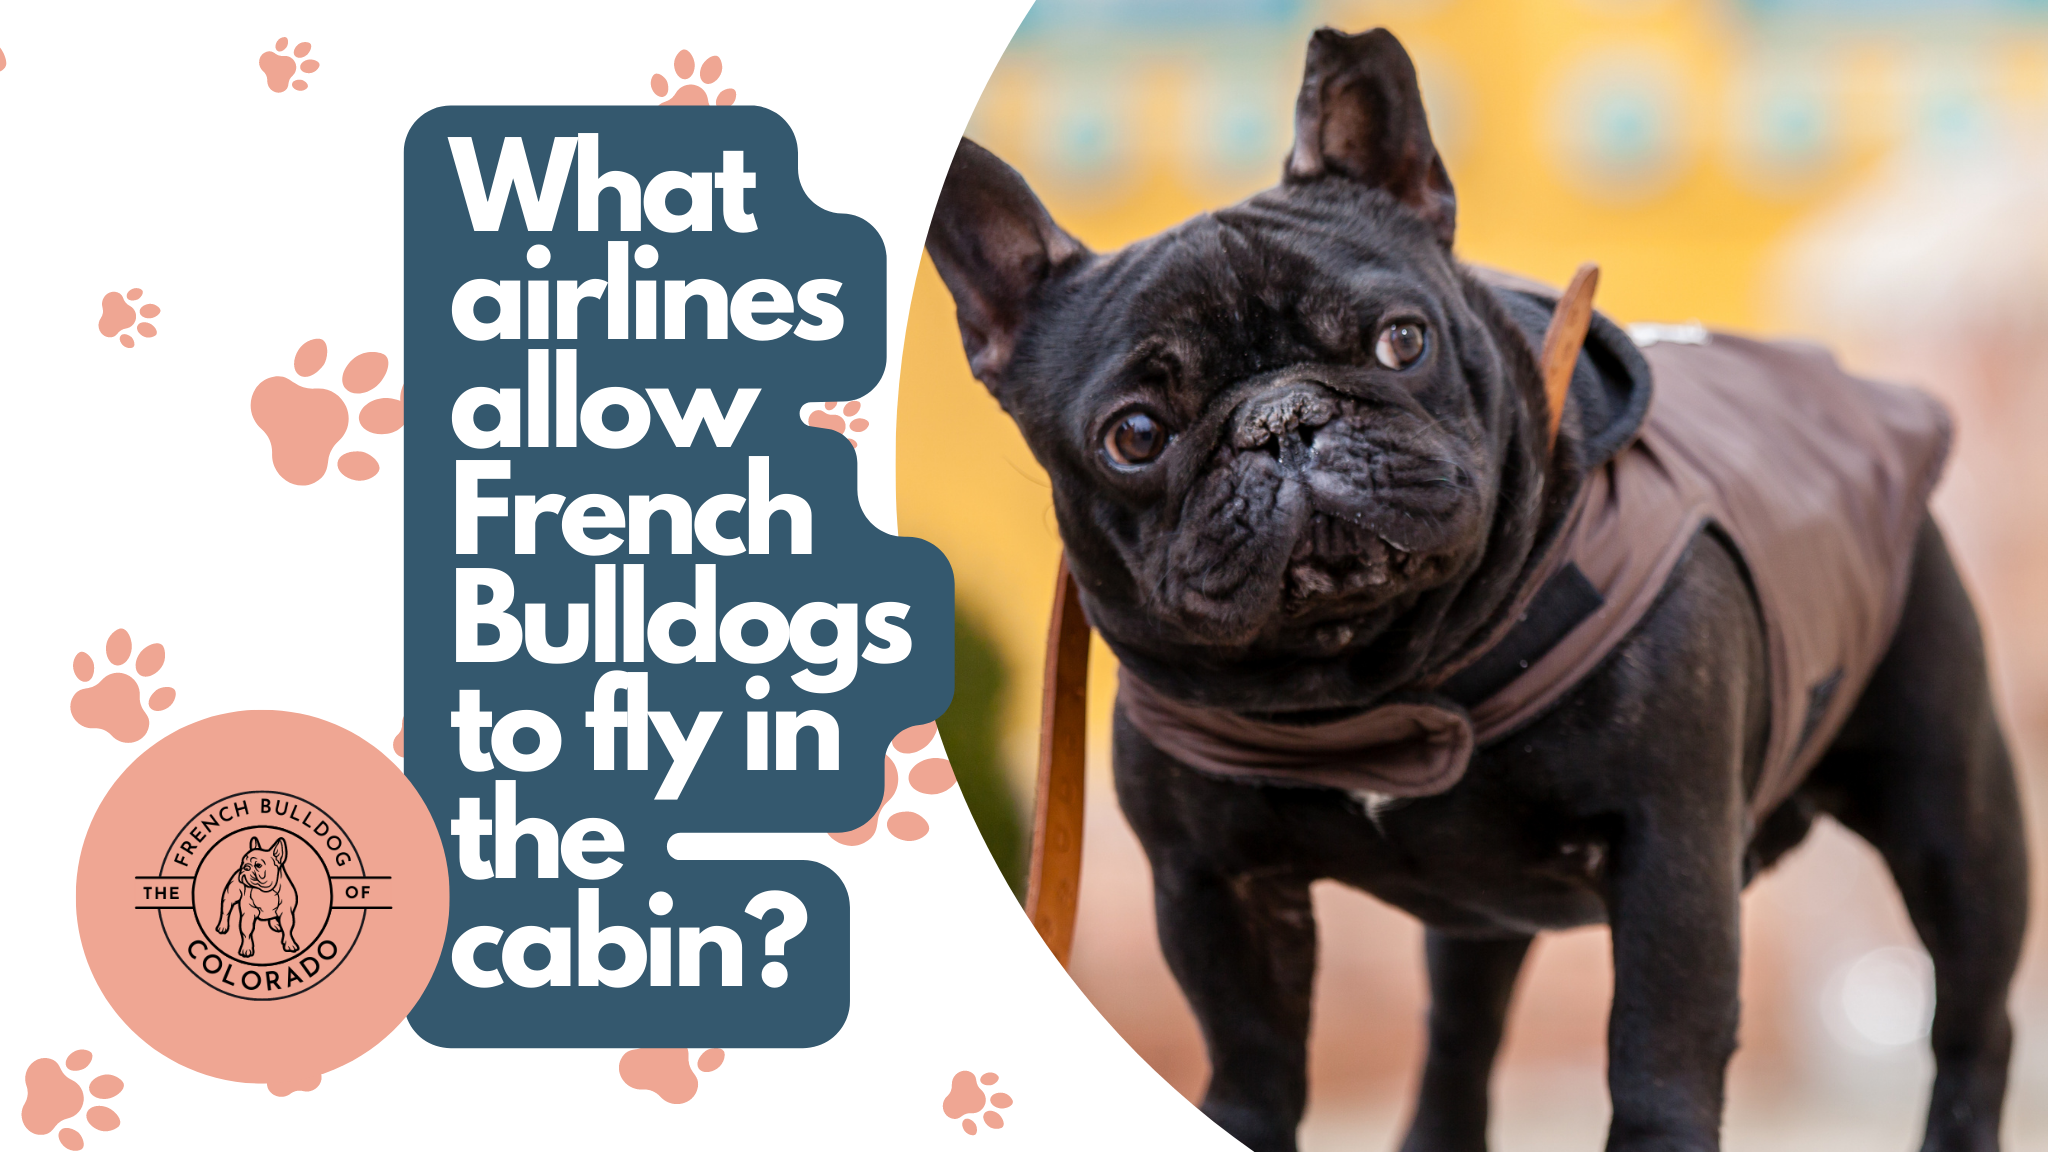 What airlines allow French Bulldogs to fly in the cabin? The French Bulldog of Colorado Blog